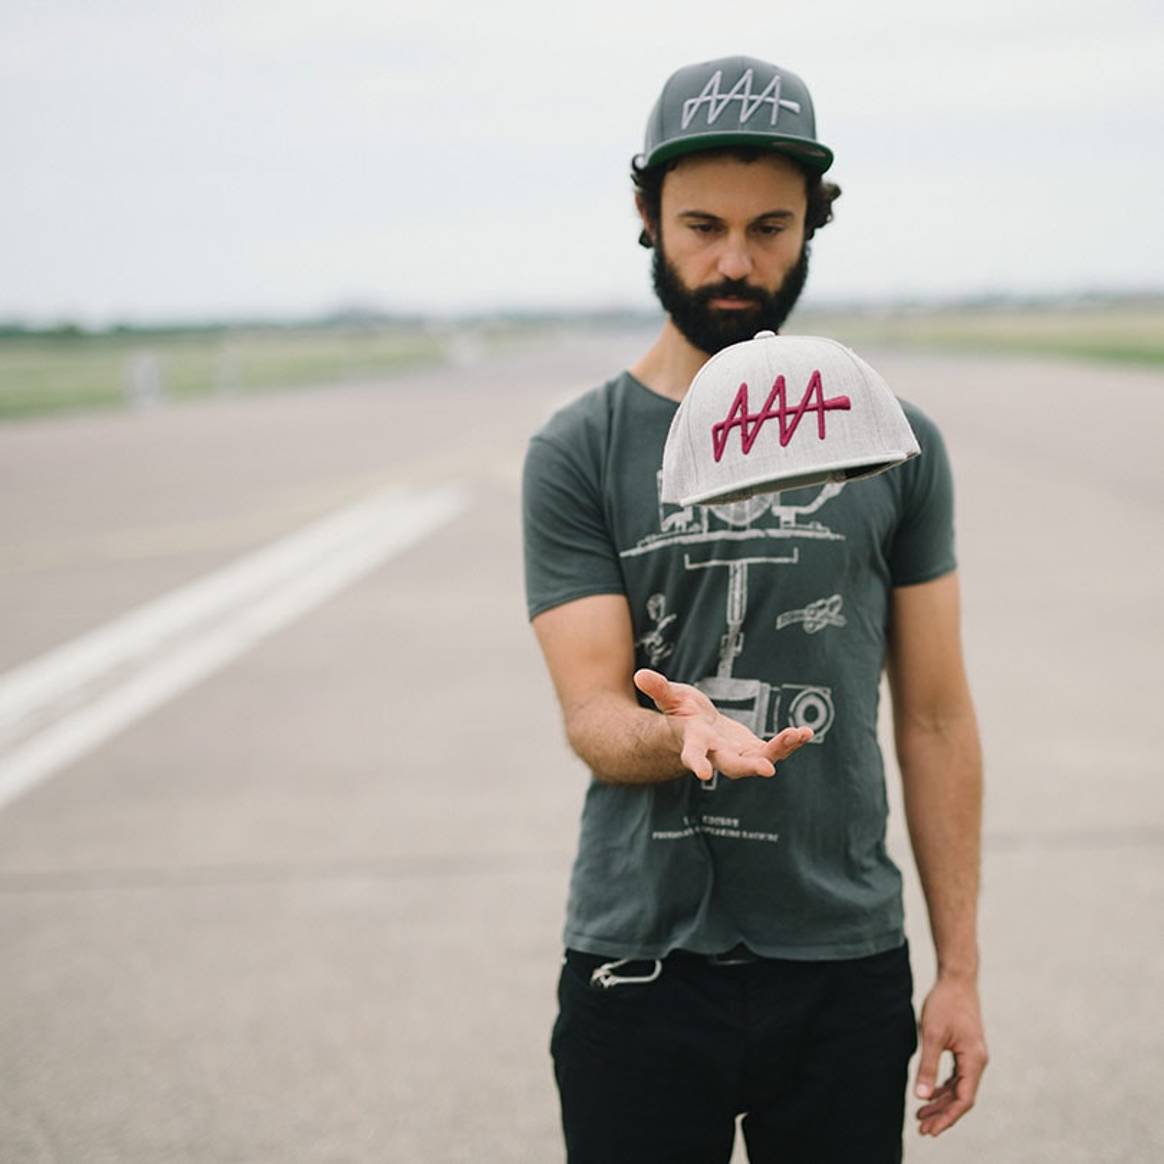 Audio Architect Apparel to revive physical music using sustainable fashion